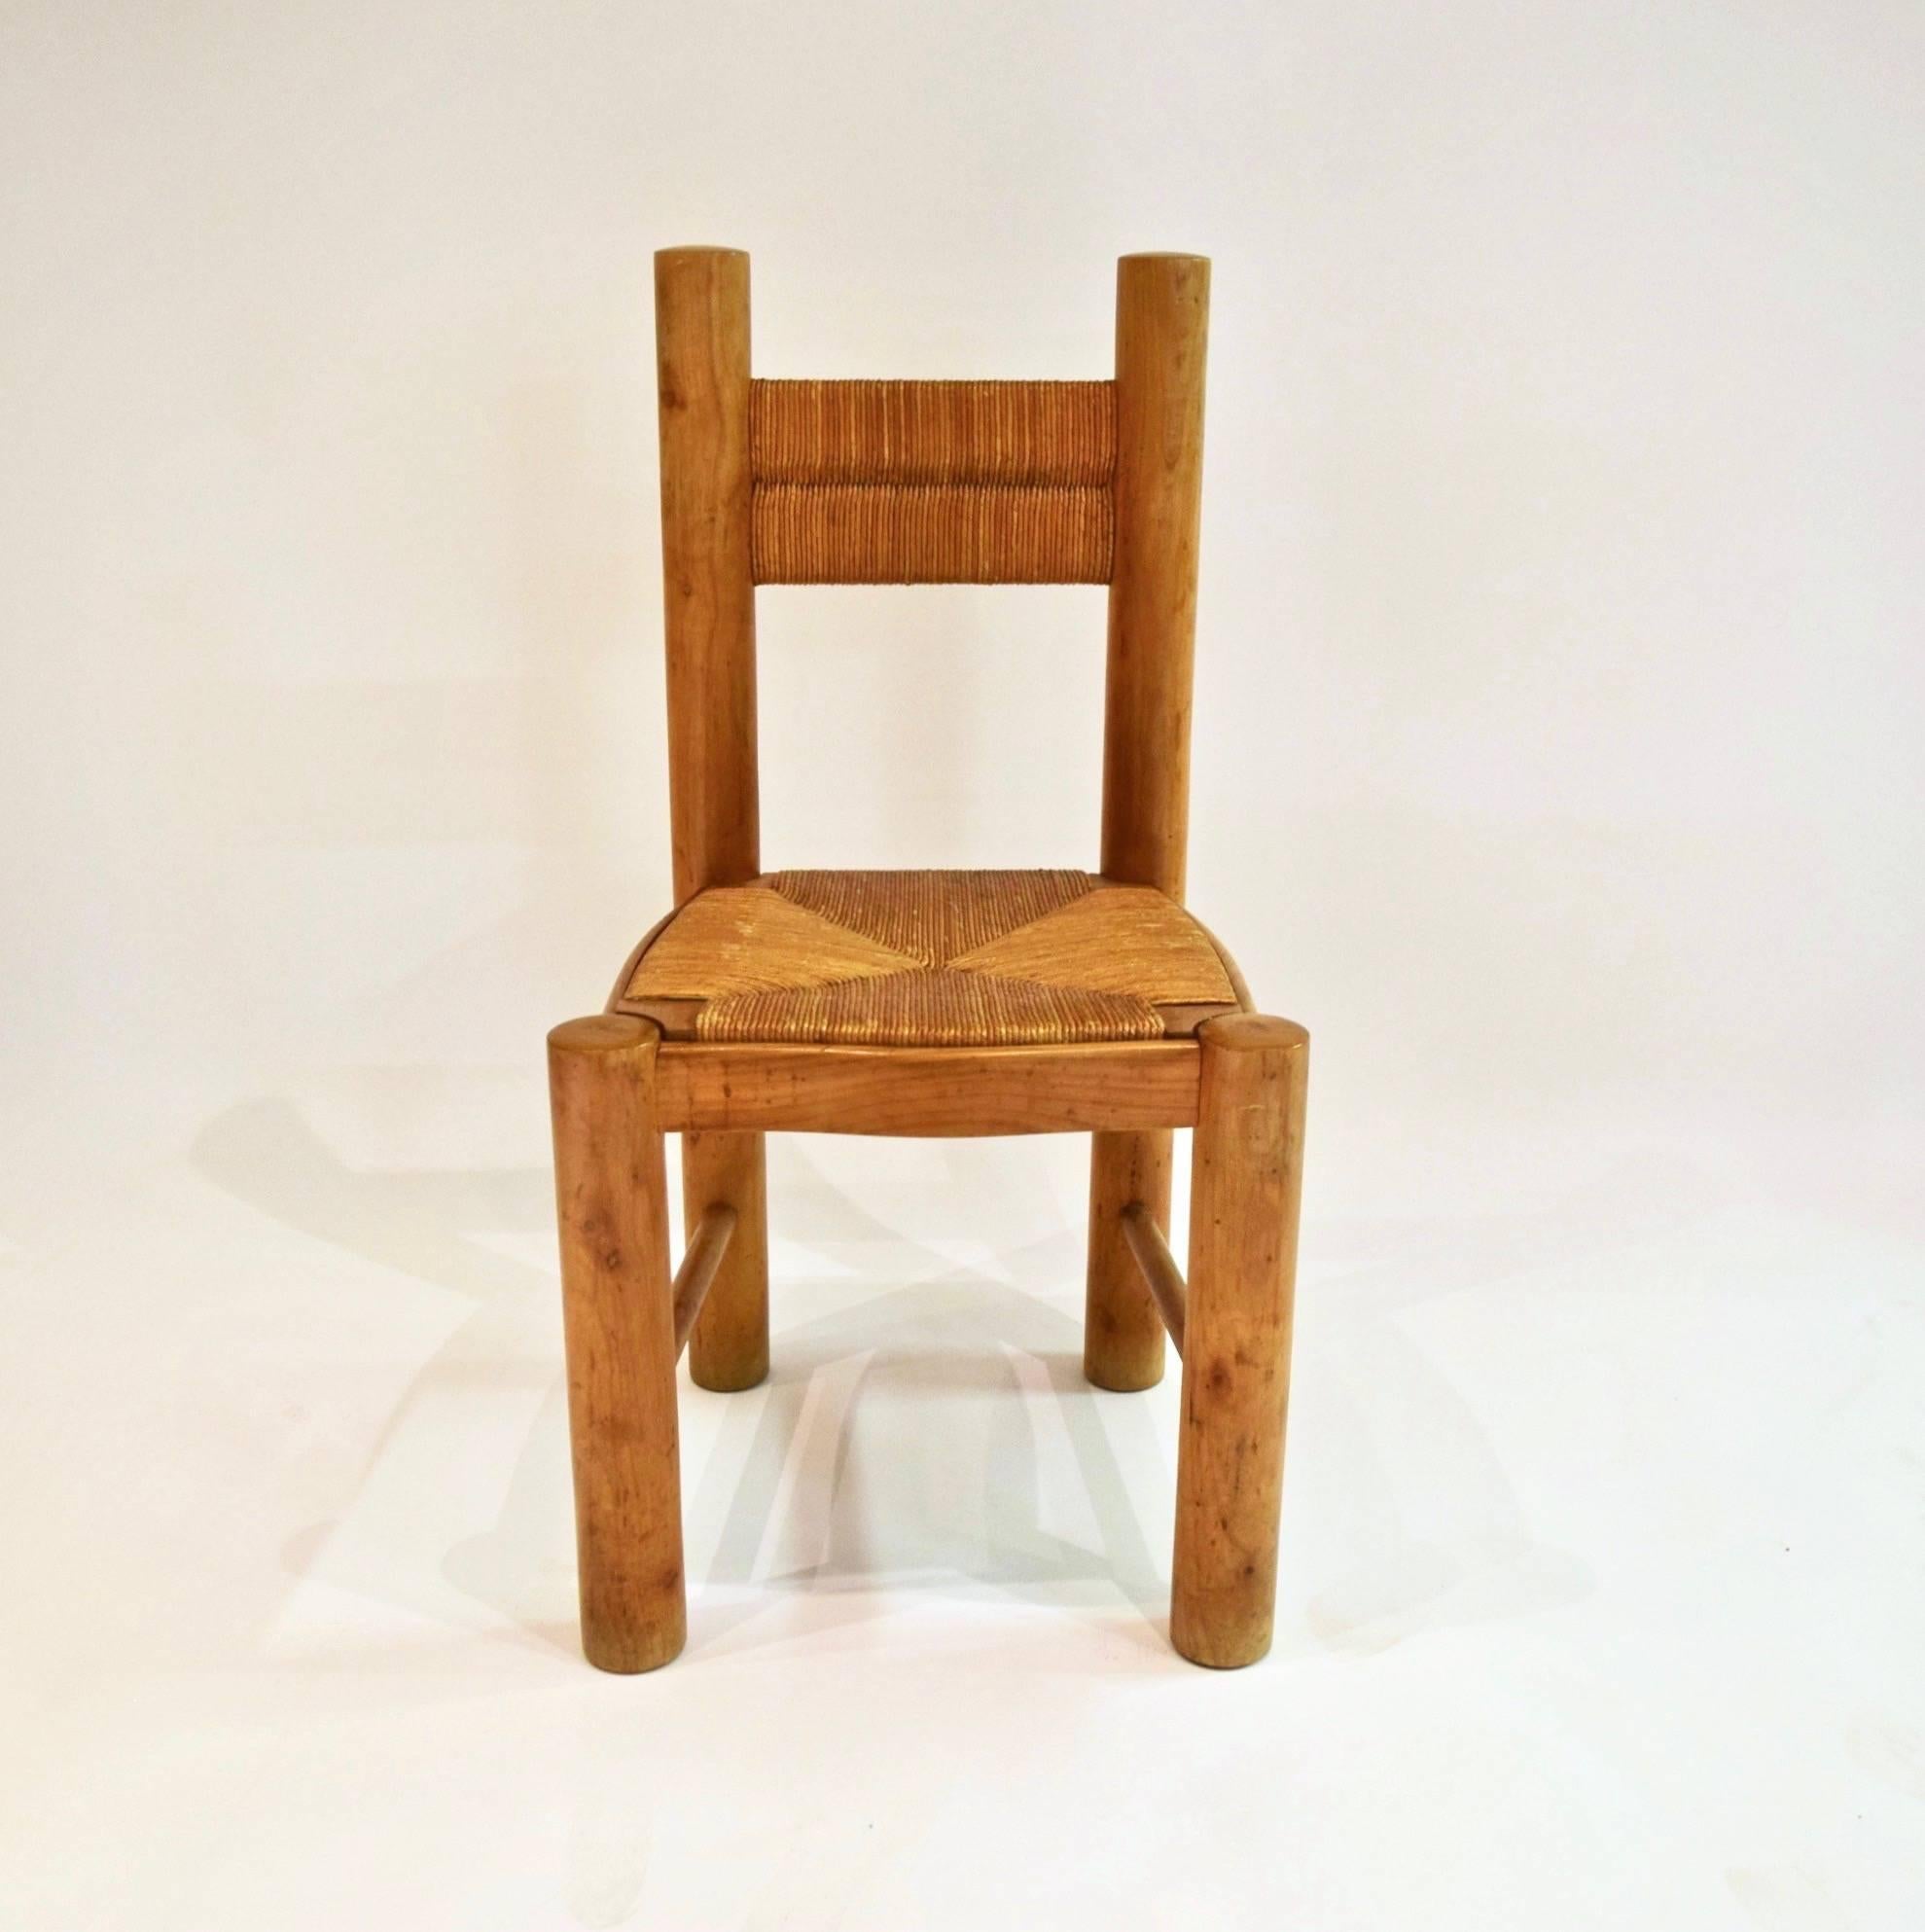 Six armless dining chairs by Jean Royère with rounded, cylindrical rush wood posts as the back and front legs, two perpendicular, cylindrical stretchers, a bowed and curved ash seat frame with an inset seat of woven rush, and a horizontal woven rush